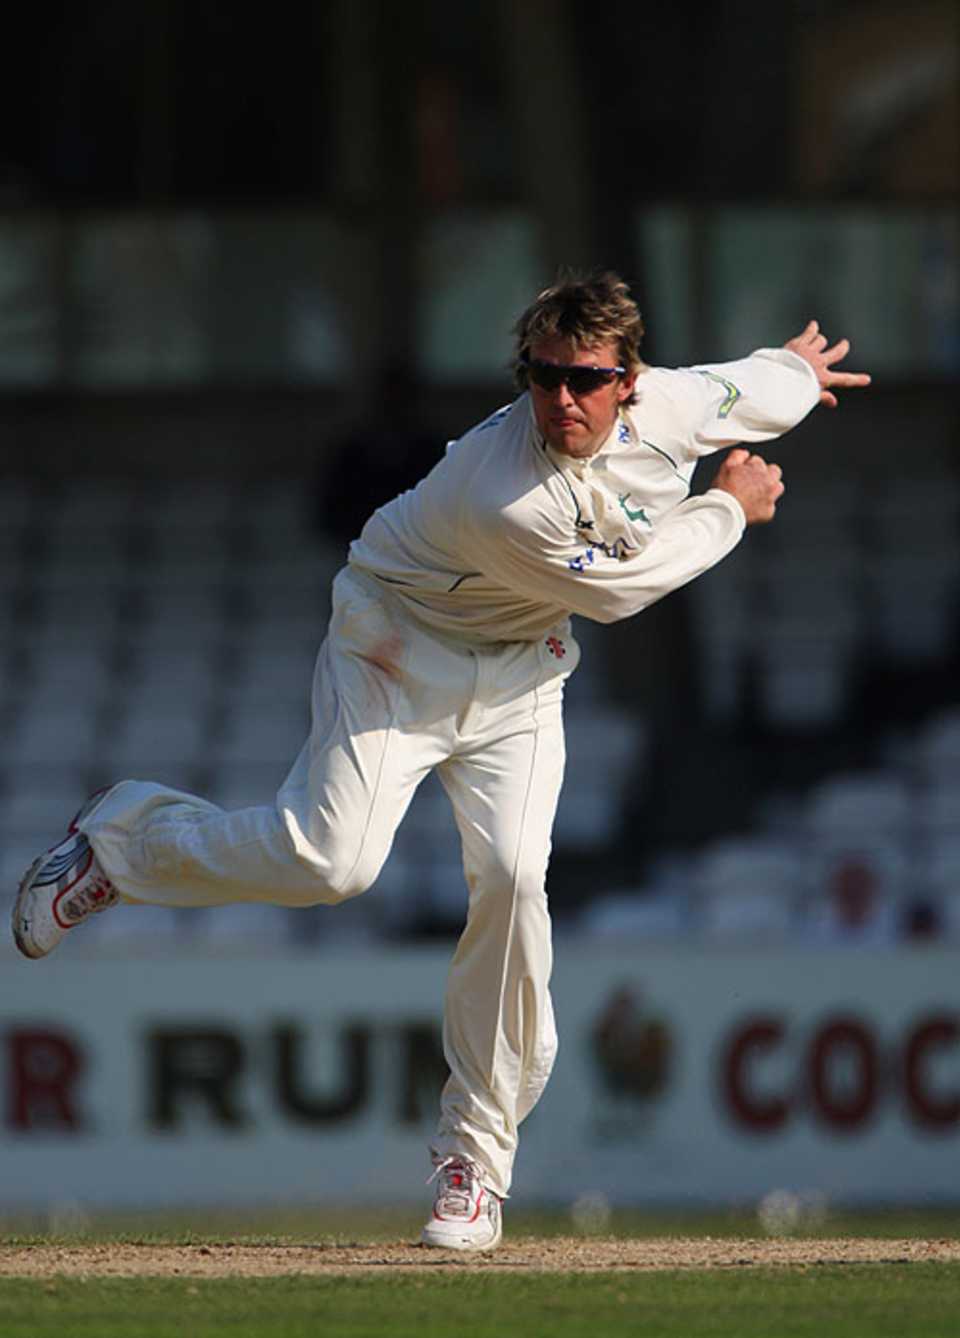 Graeme Swann claimed three wickets after scoring 82, Surrey v Nottinghamshire, The Oval, September 19, 2008